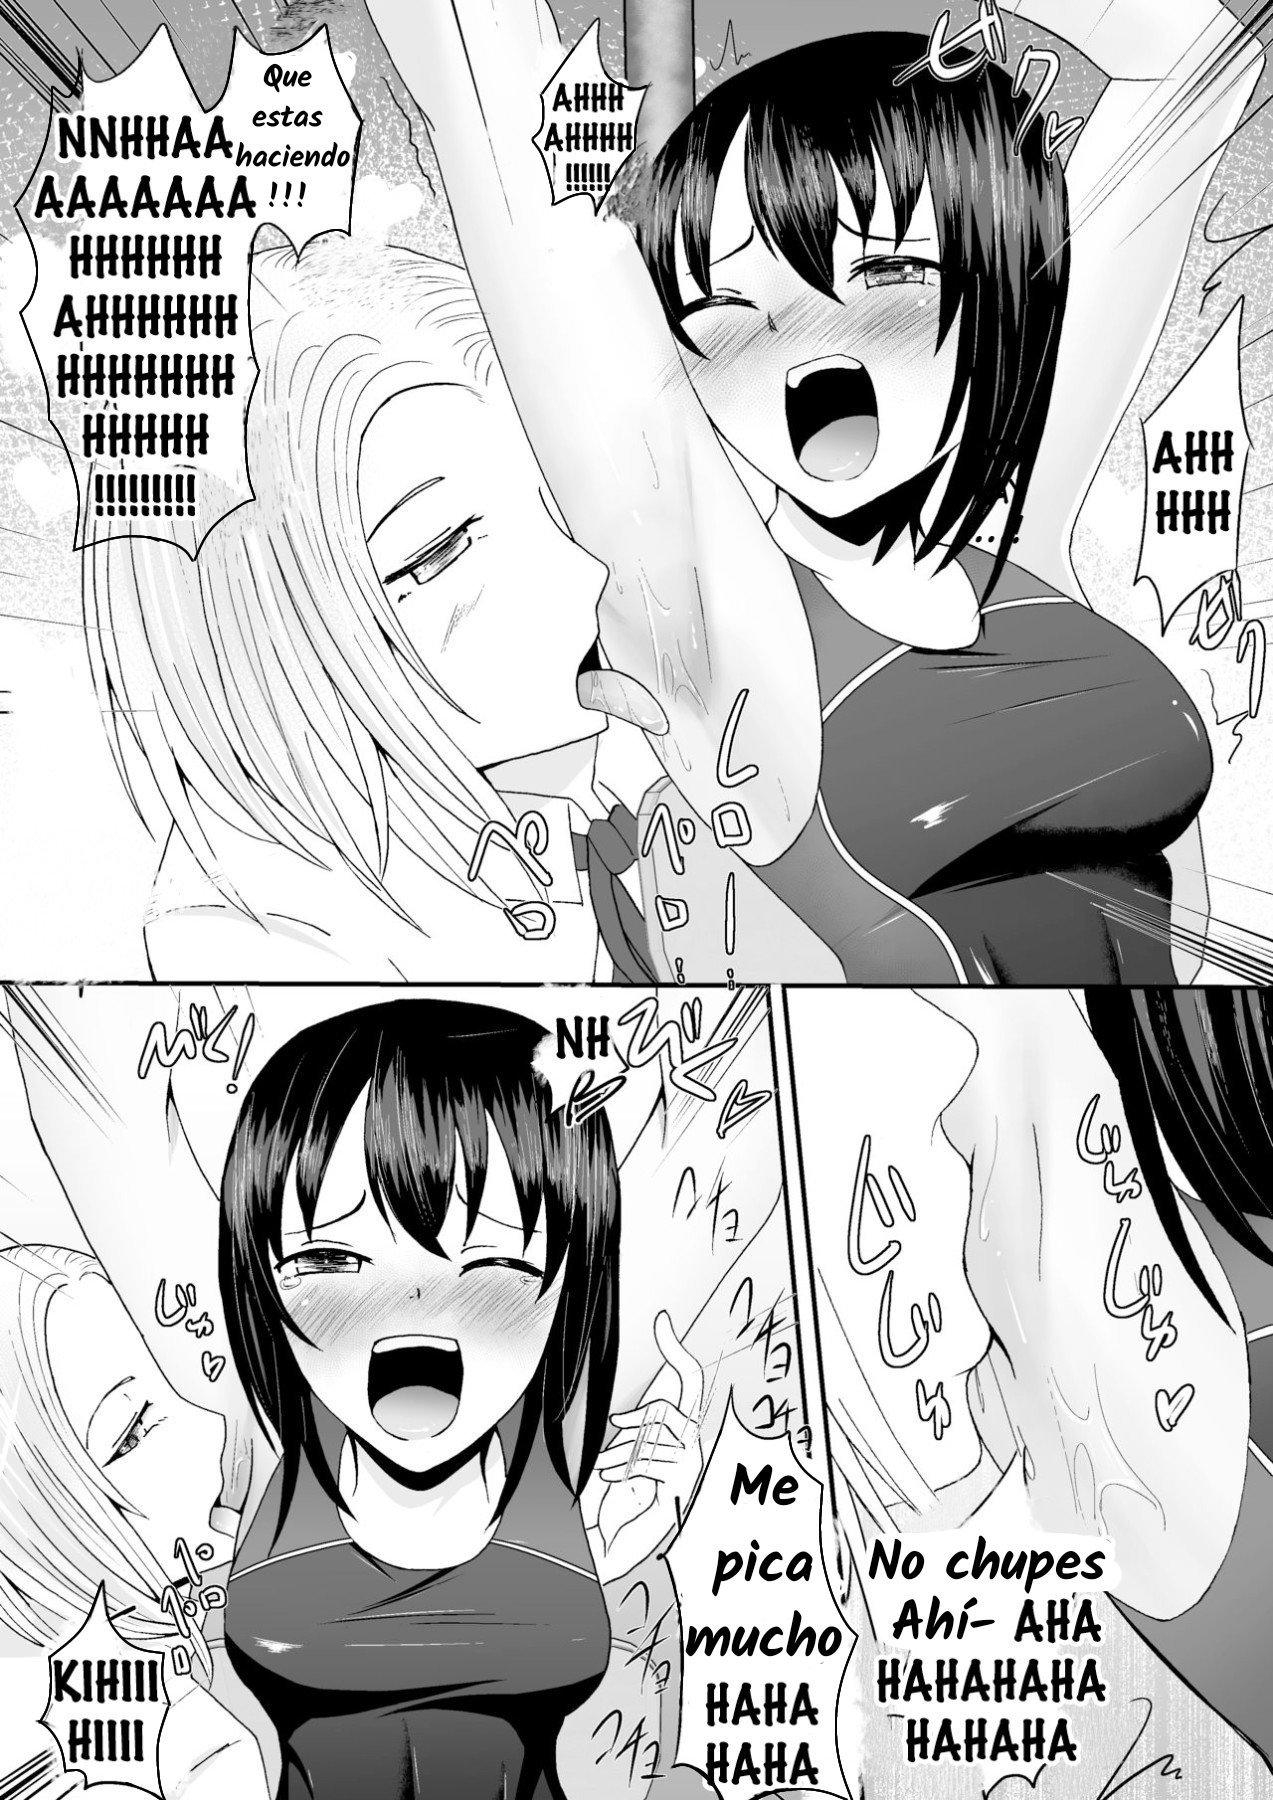 The Swimsuit Girls Ticklish Weapons - 24